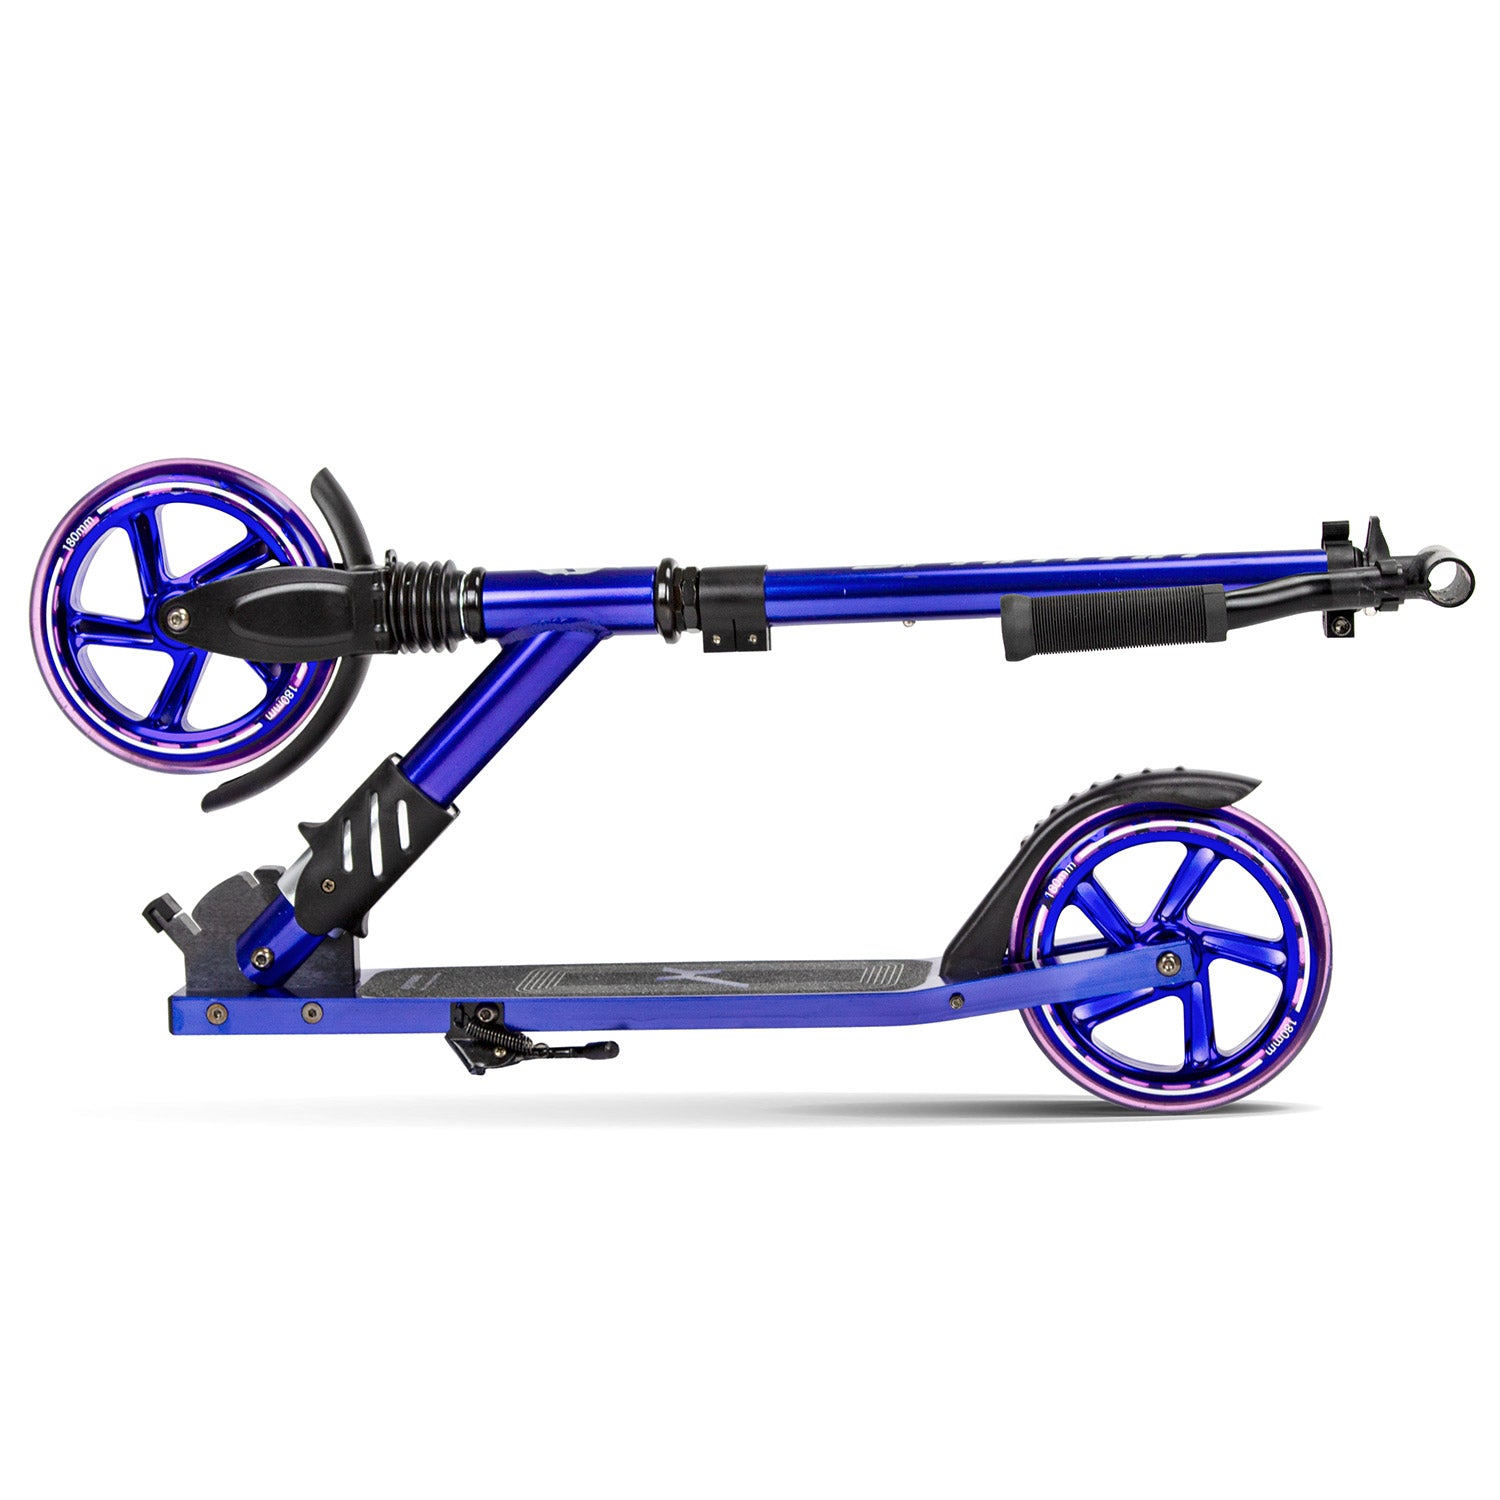 Spartan Extreme 180mm Folding Scooters - Purple Chrome